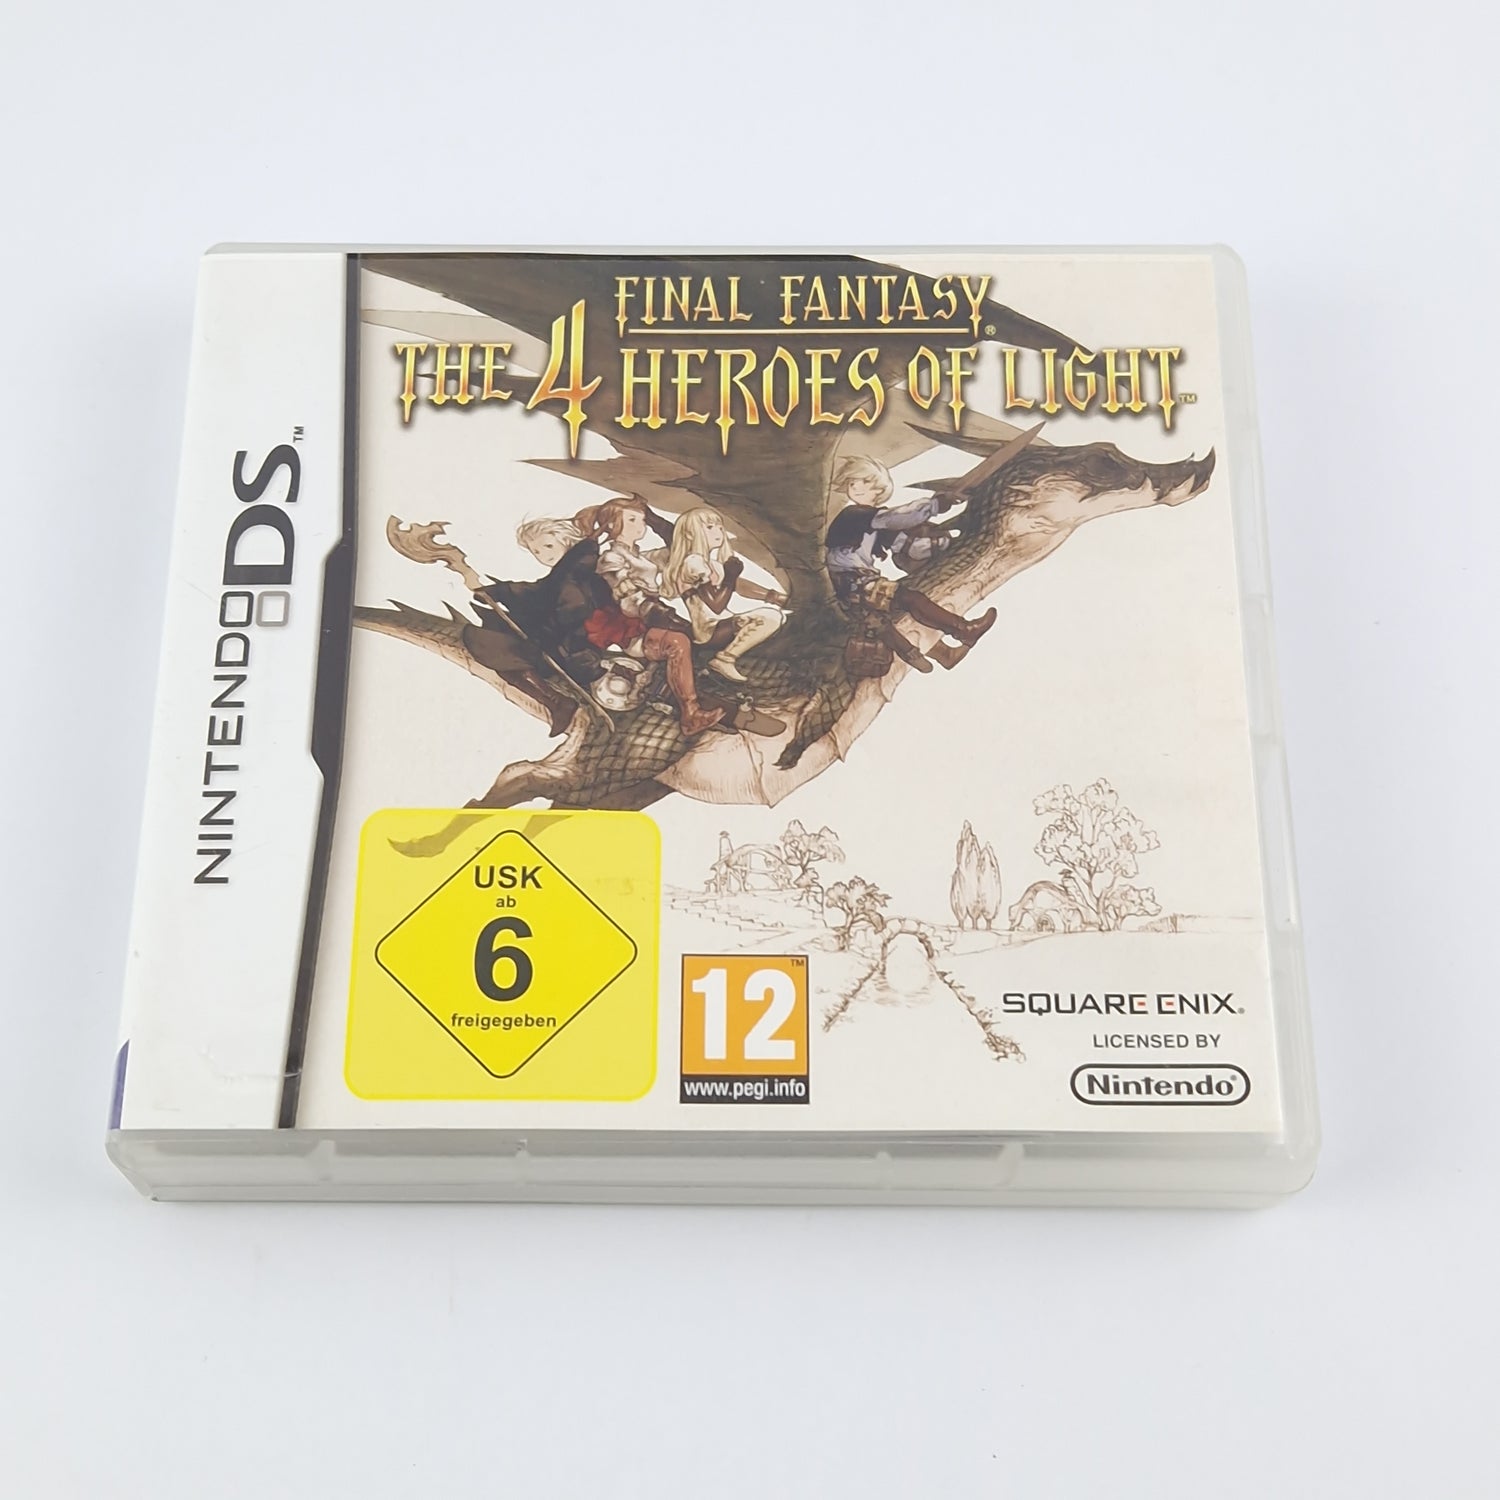 Nintendo DS Game : Final Fantasy The 4 Heroes of Light + Bradygames Guide